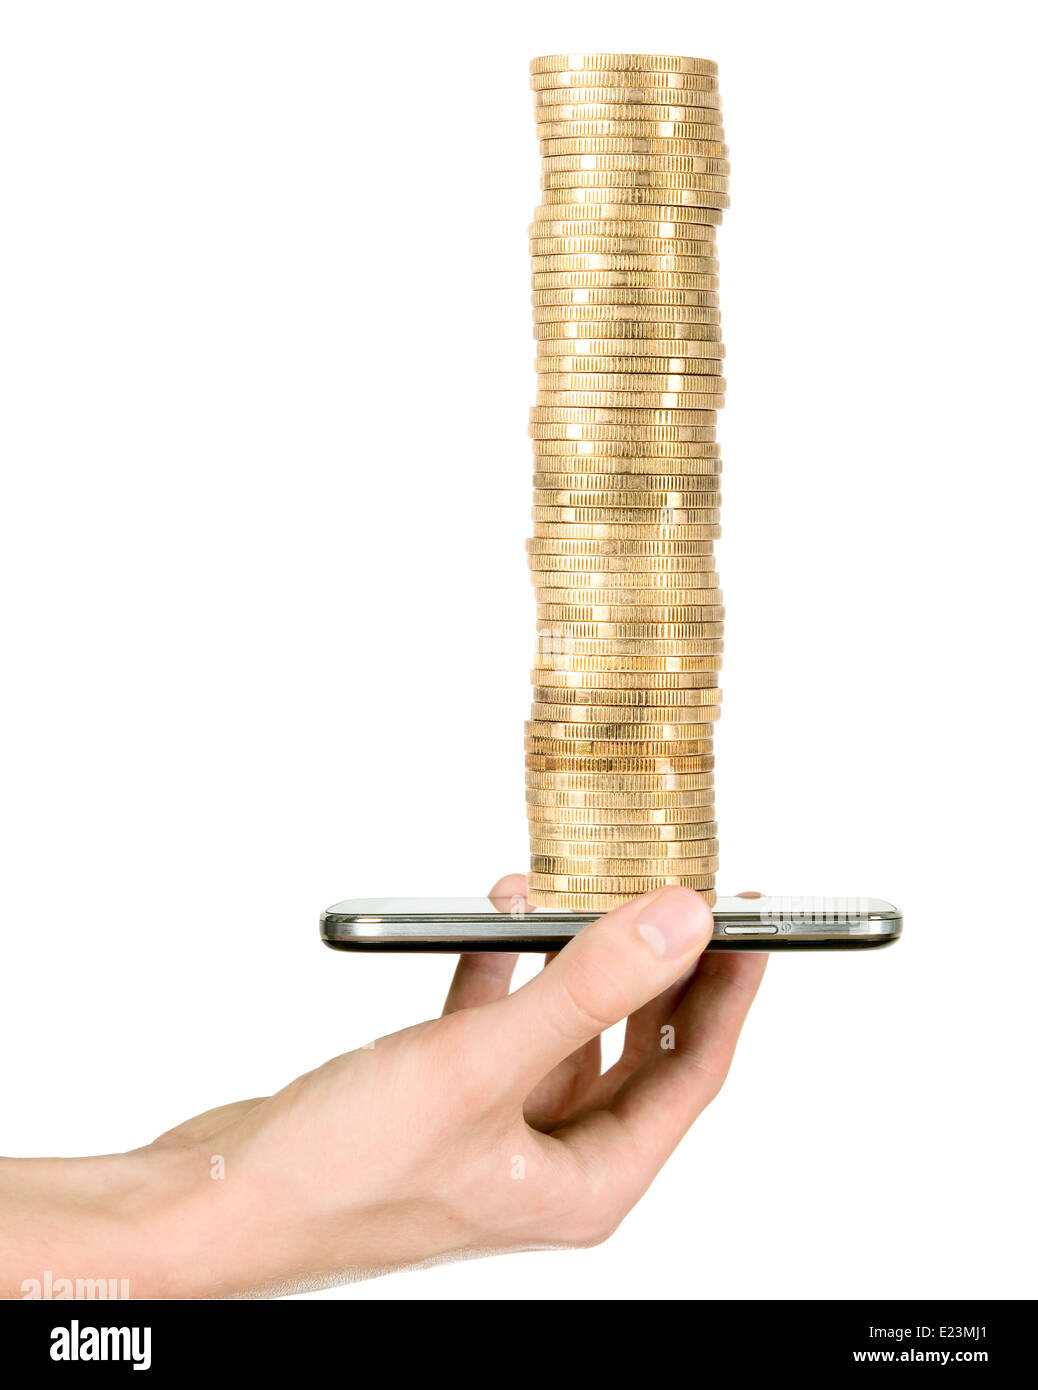 Man is holding mobile phone and showing tower of coins Stock Photo